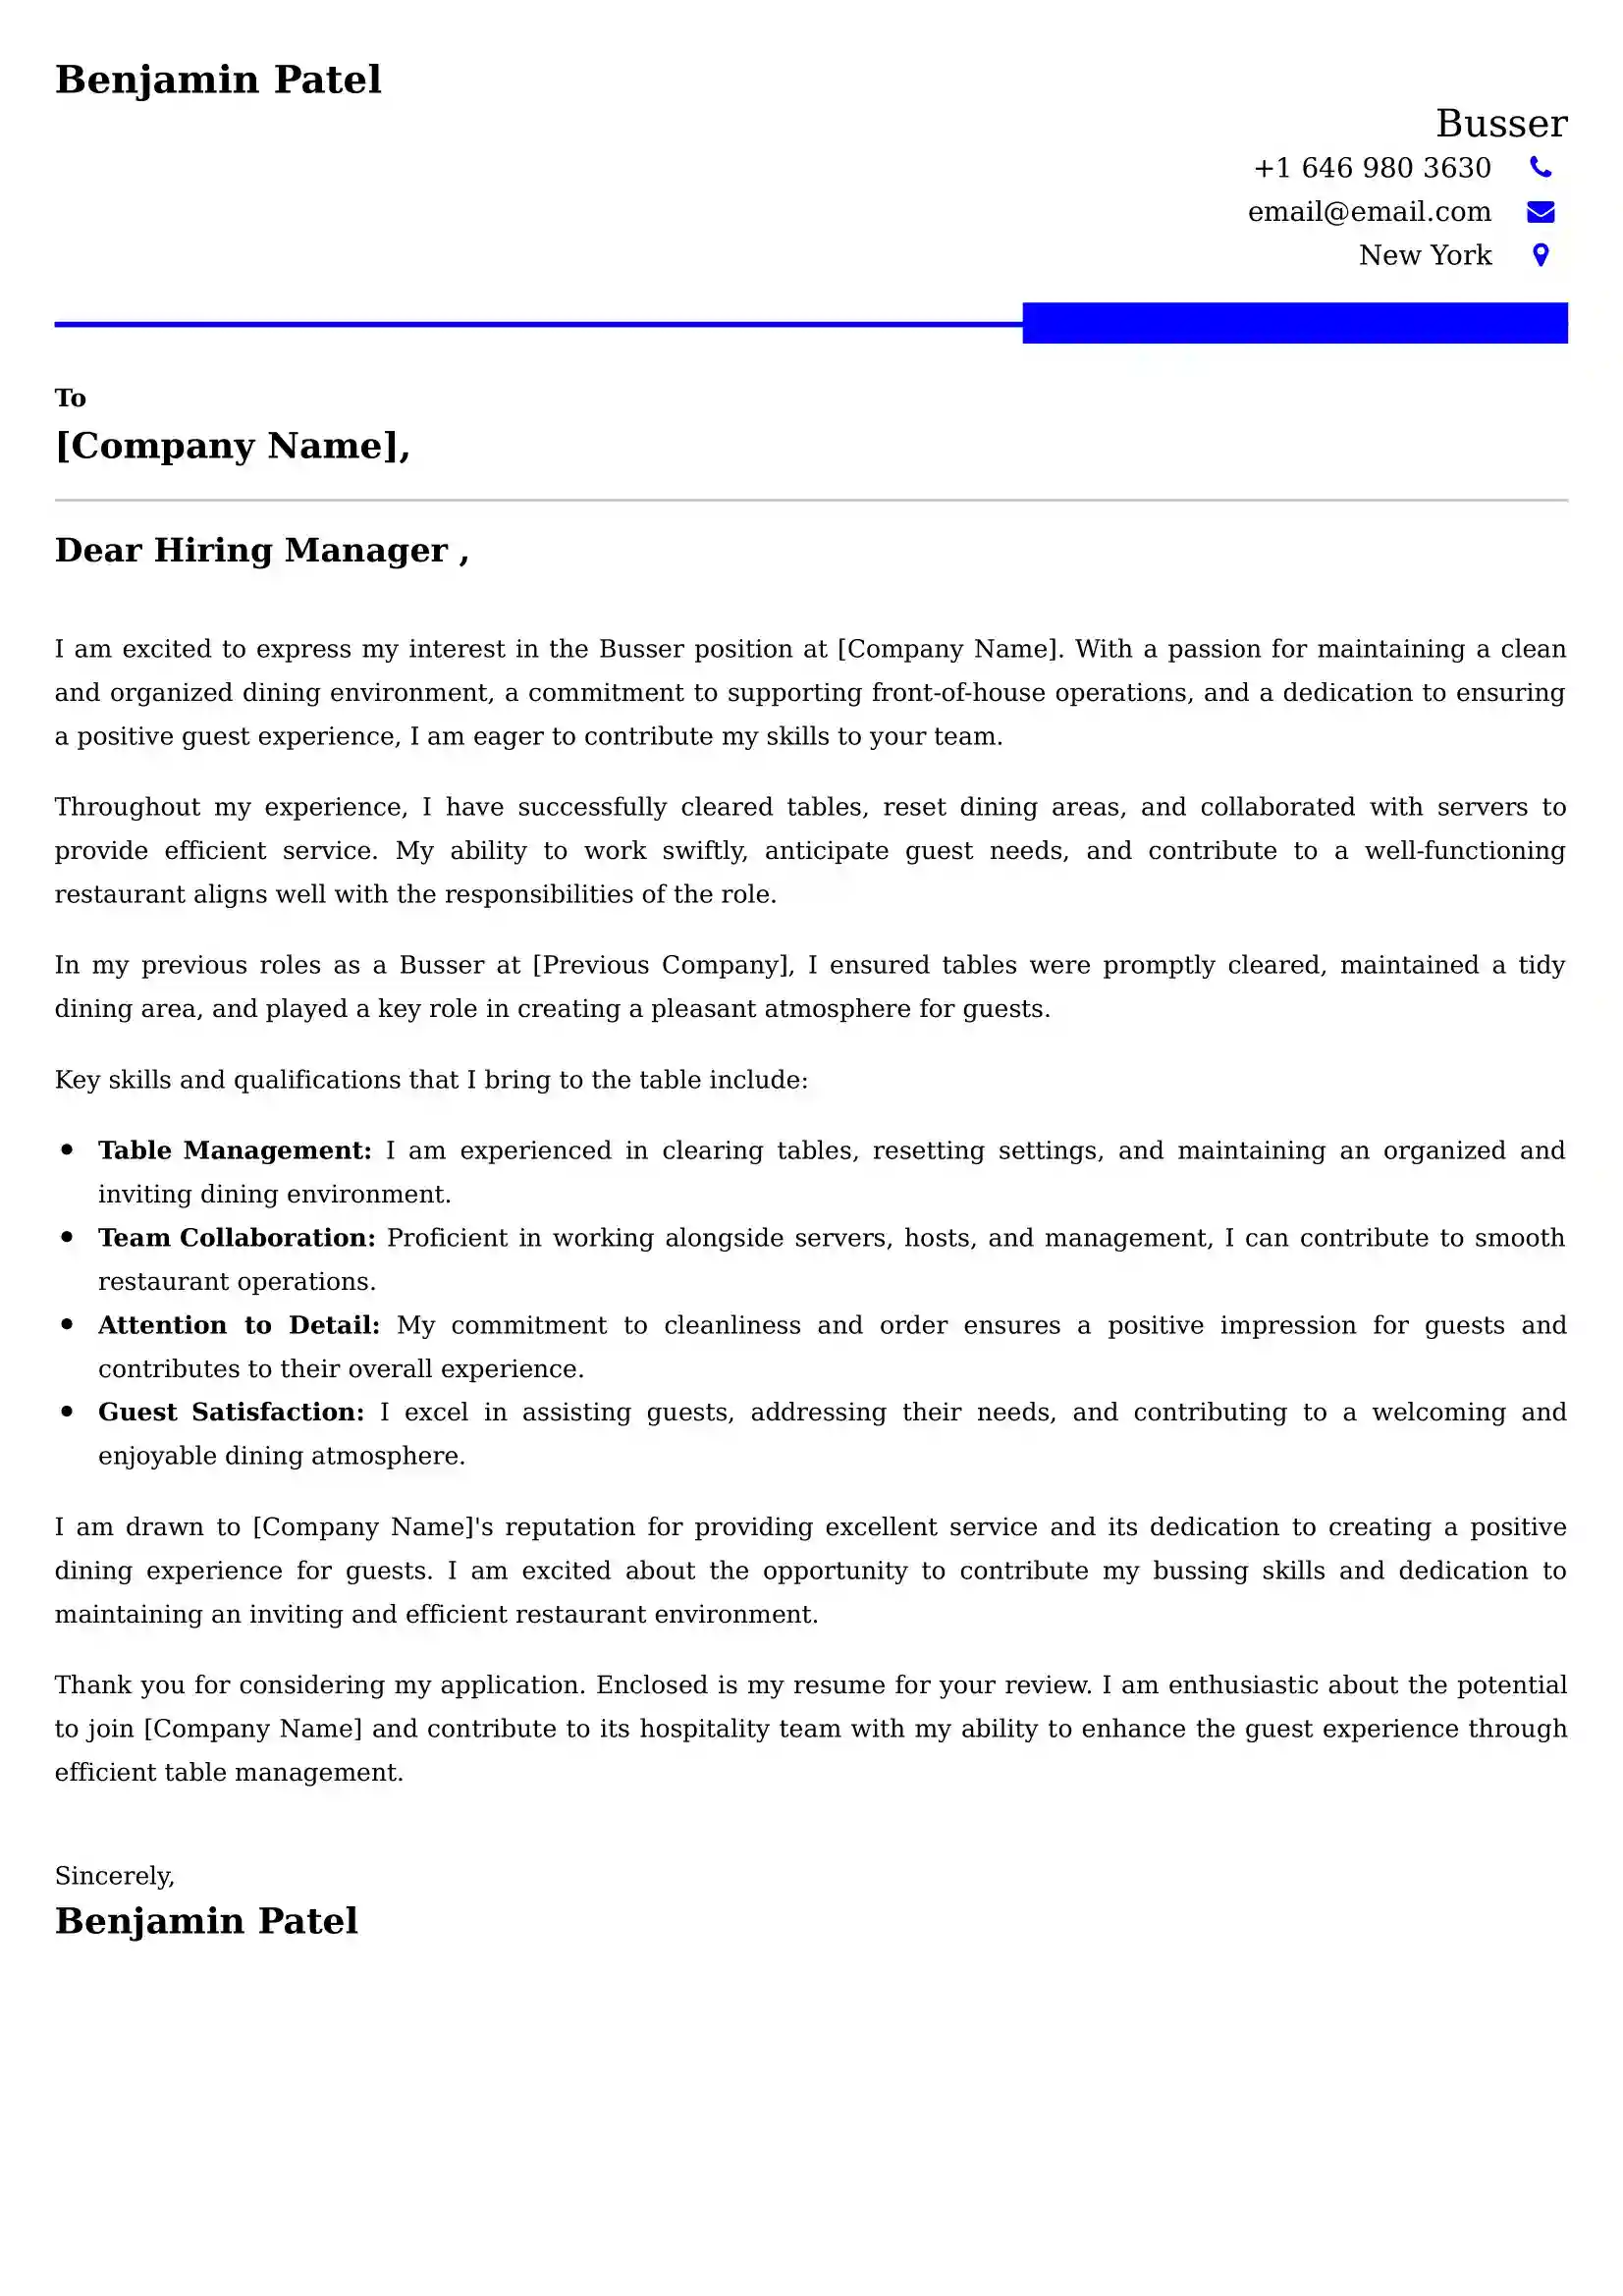 Busser Cover Letter Examples -Latest Brazilian Templates